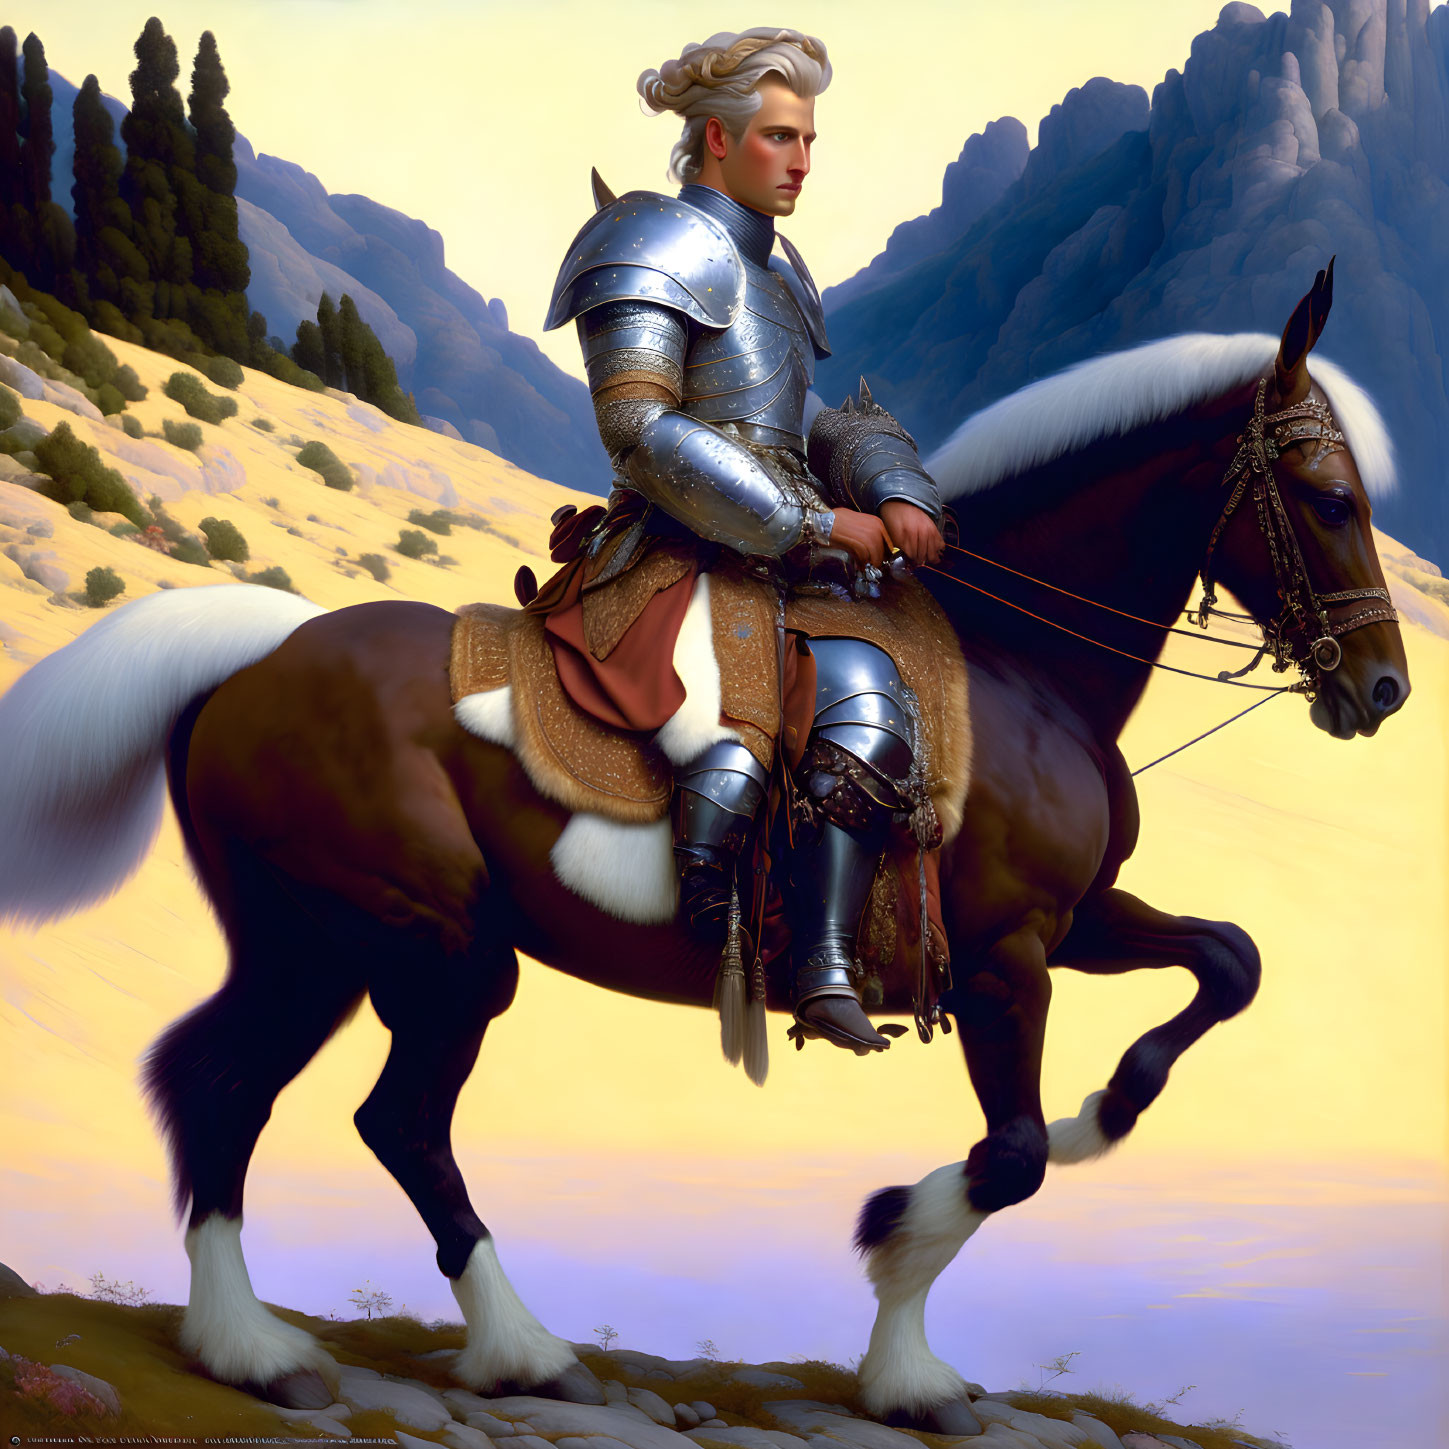 Knight on Horseback in Sunset Landscape with Cliffs